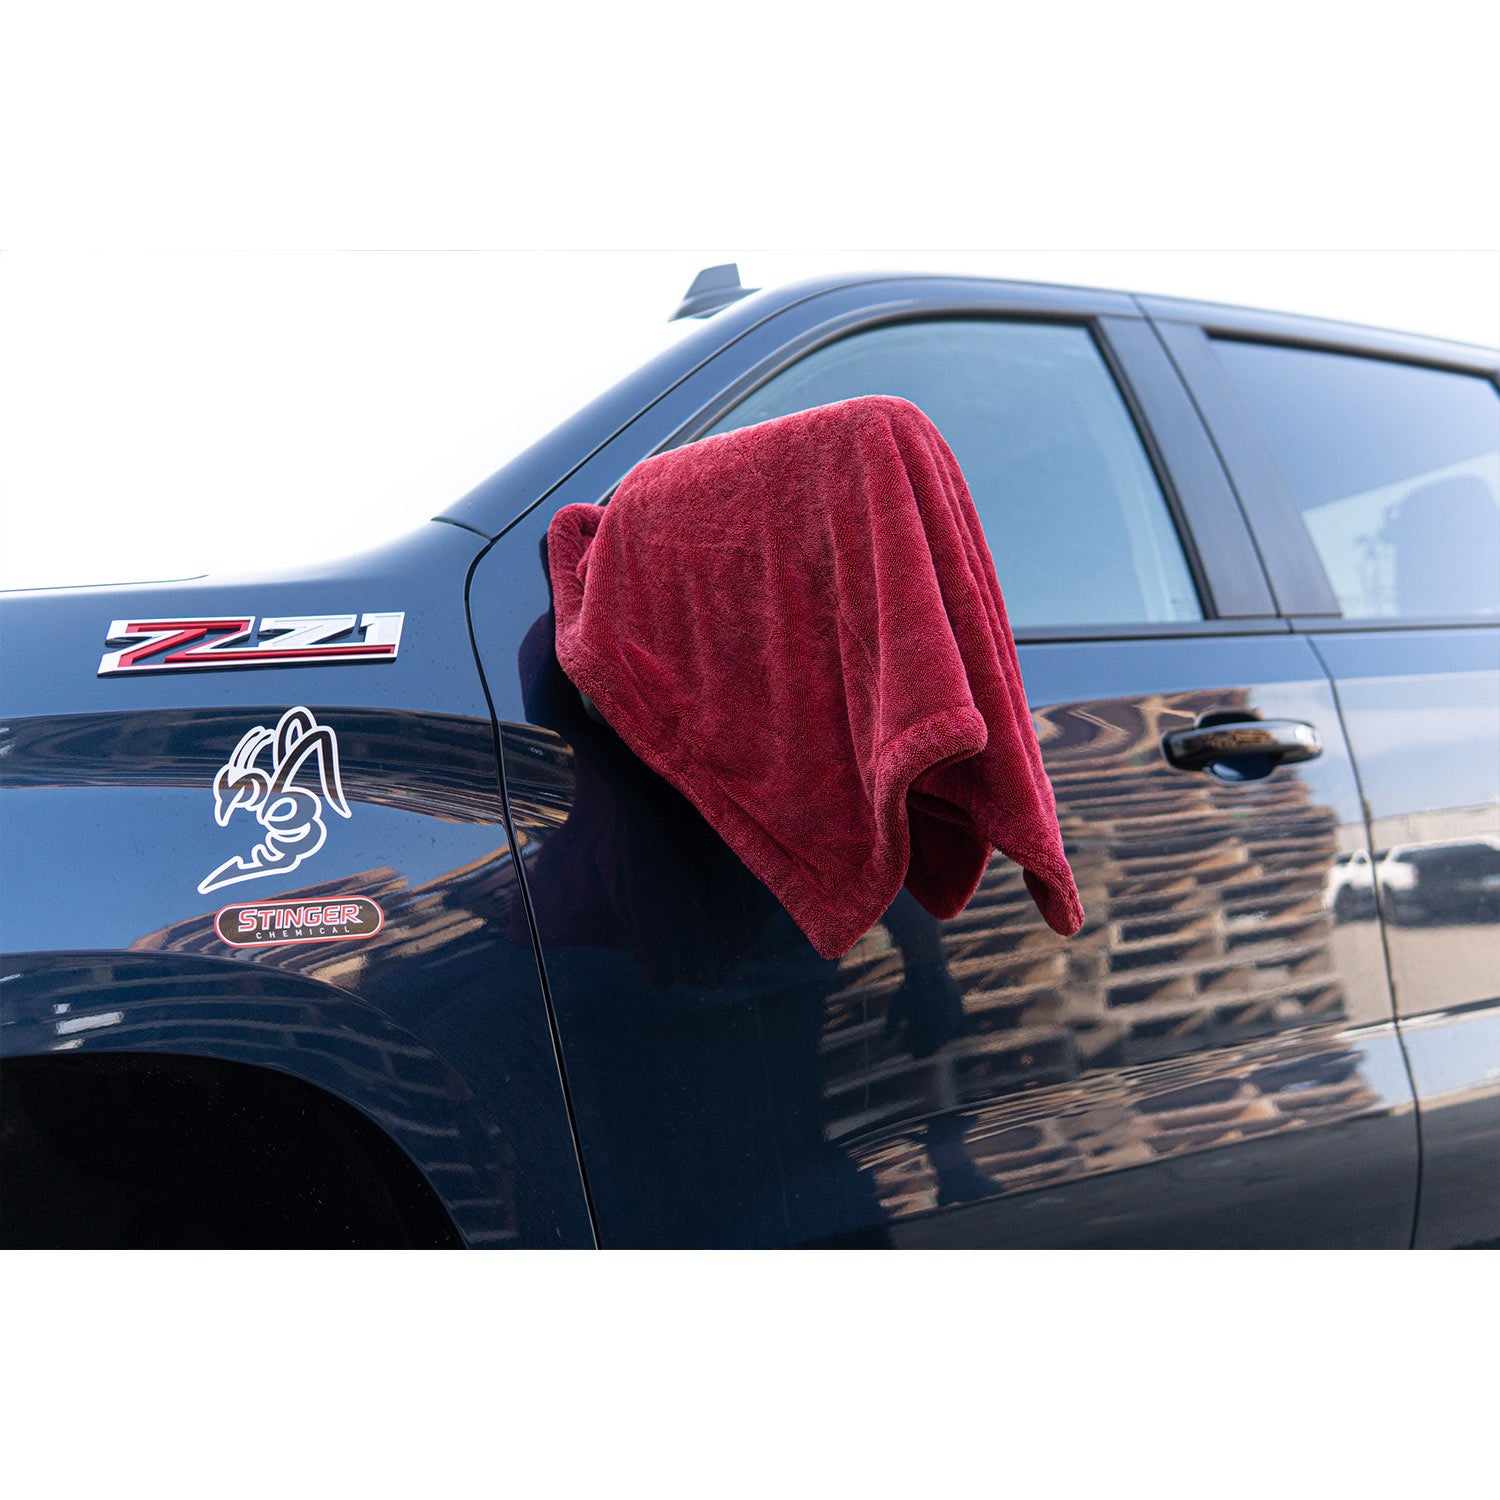 The 1500 Drying Towel